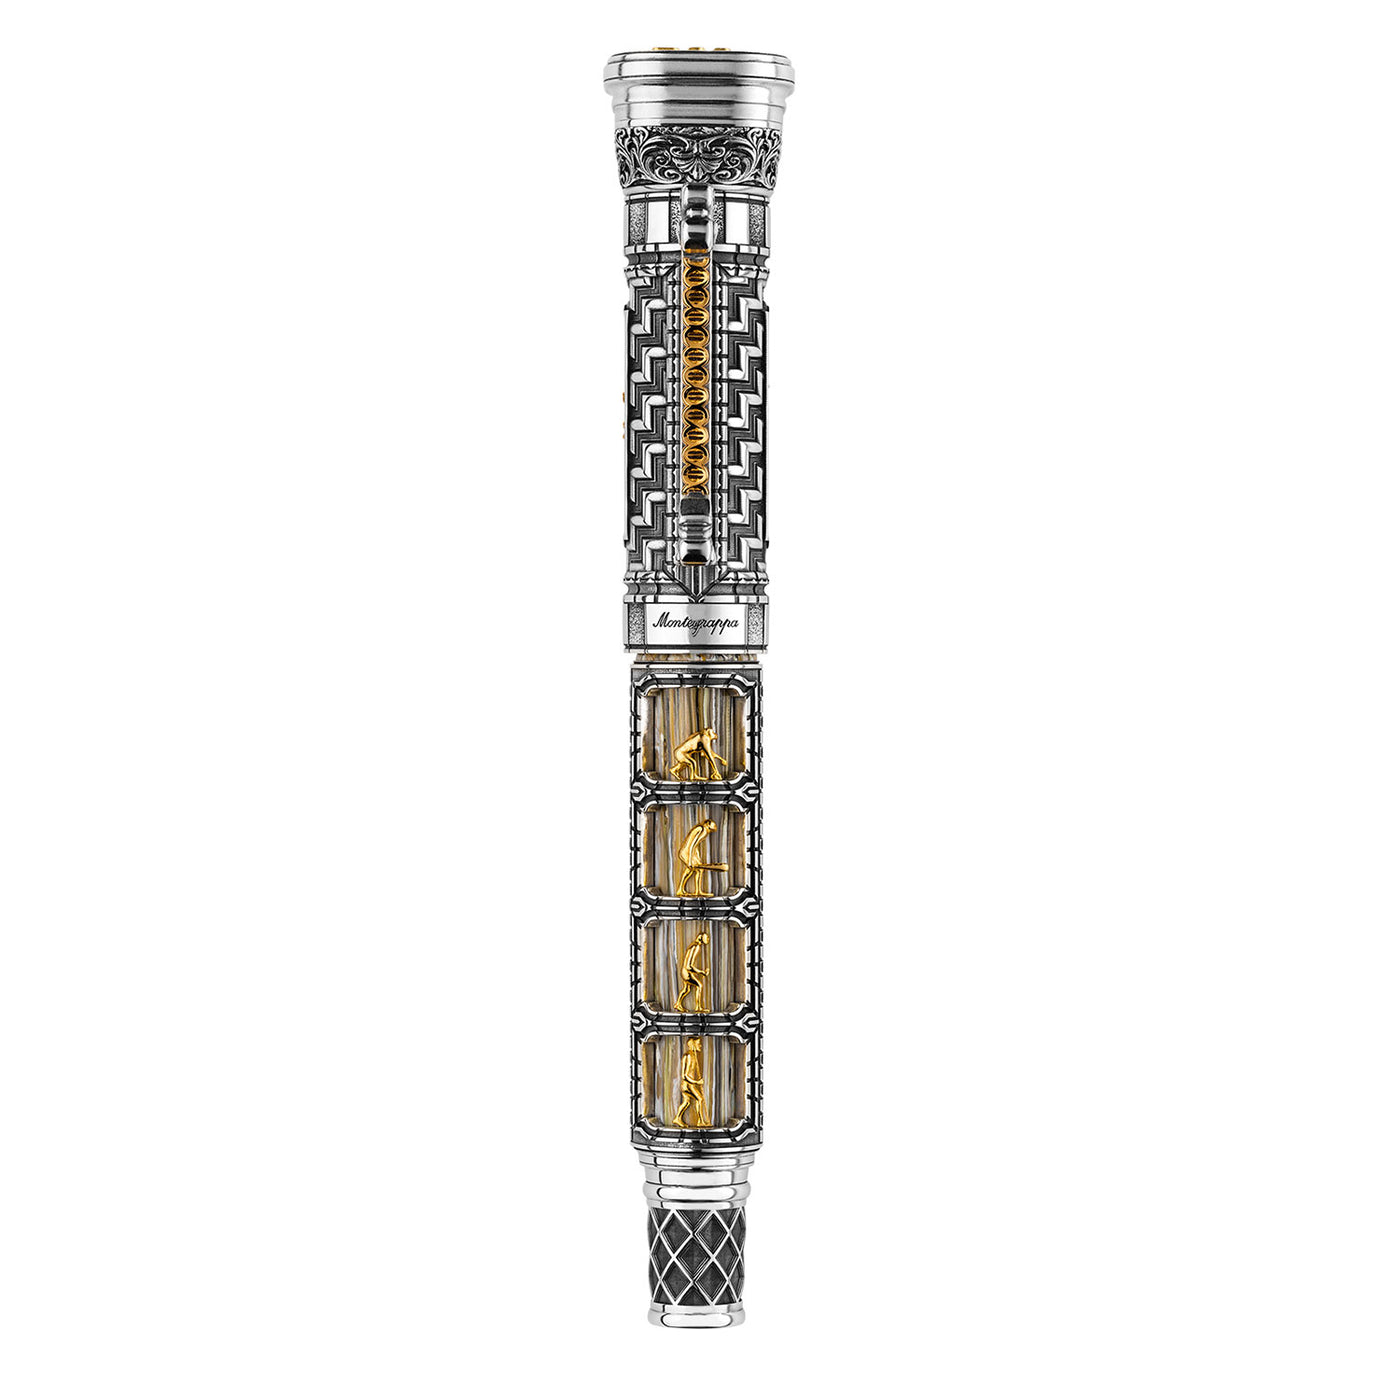 Montegrappa Theory of Evolution Roller Ball Pen - Avanguardia (Limited Edition) 5